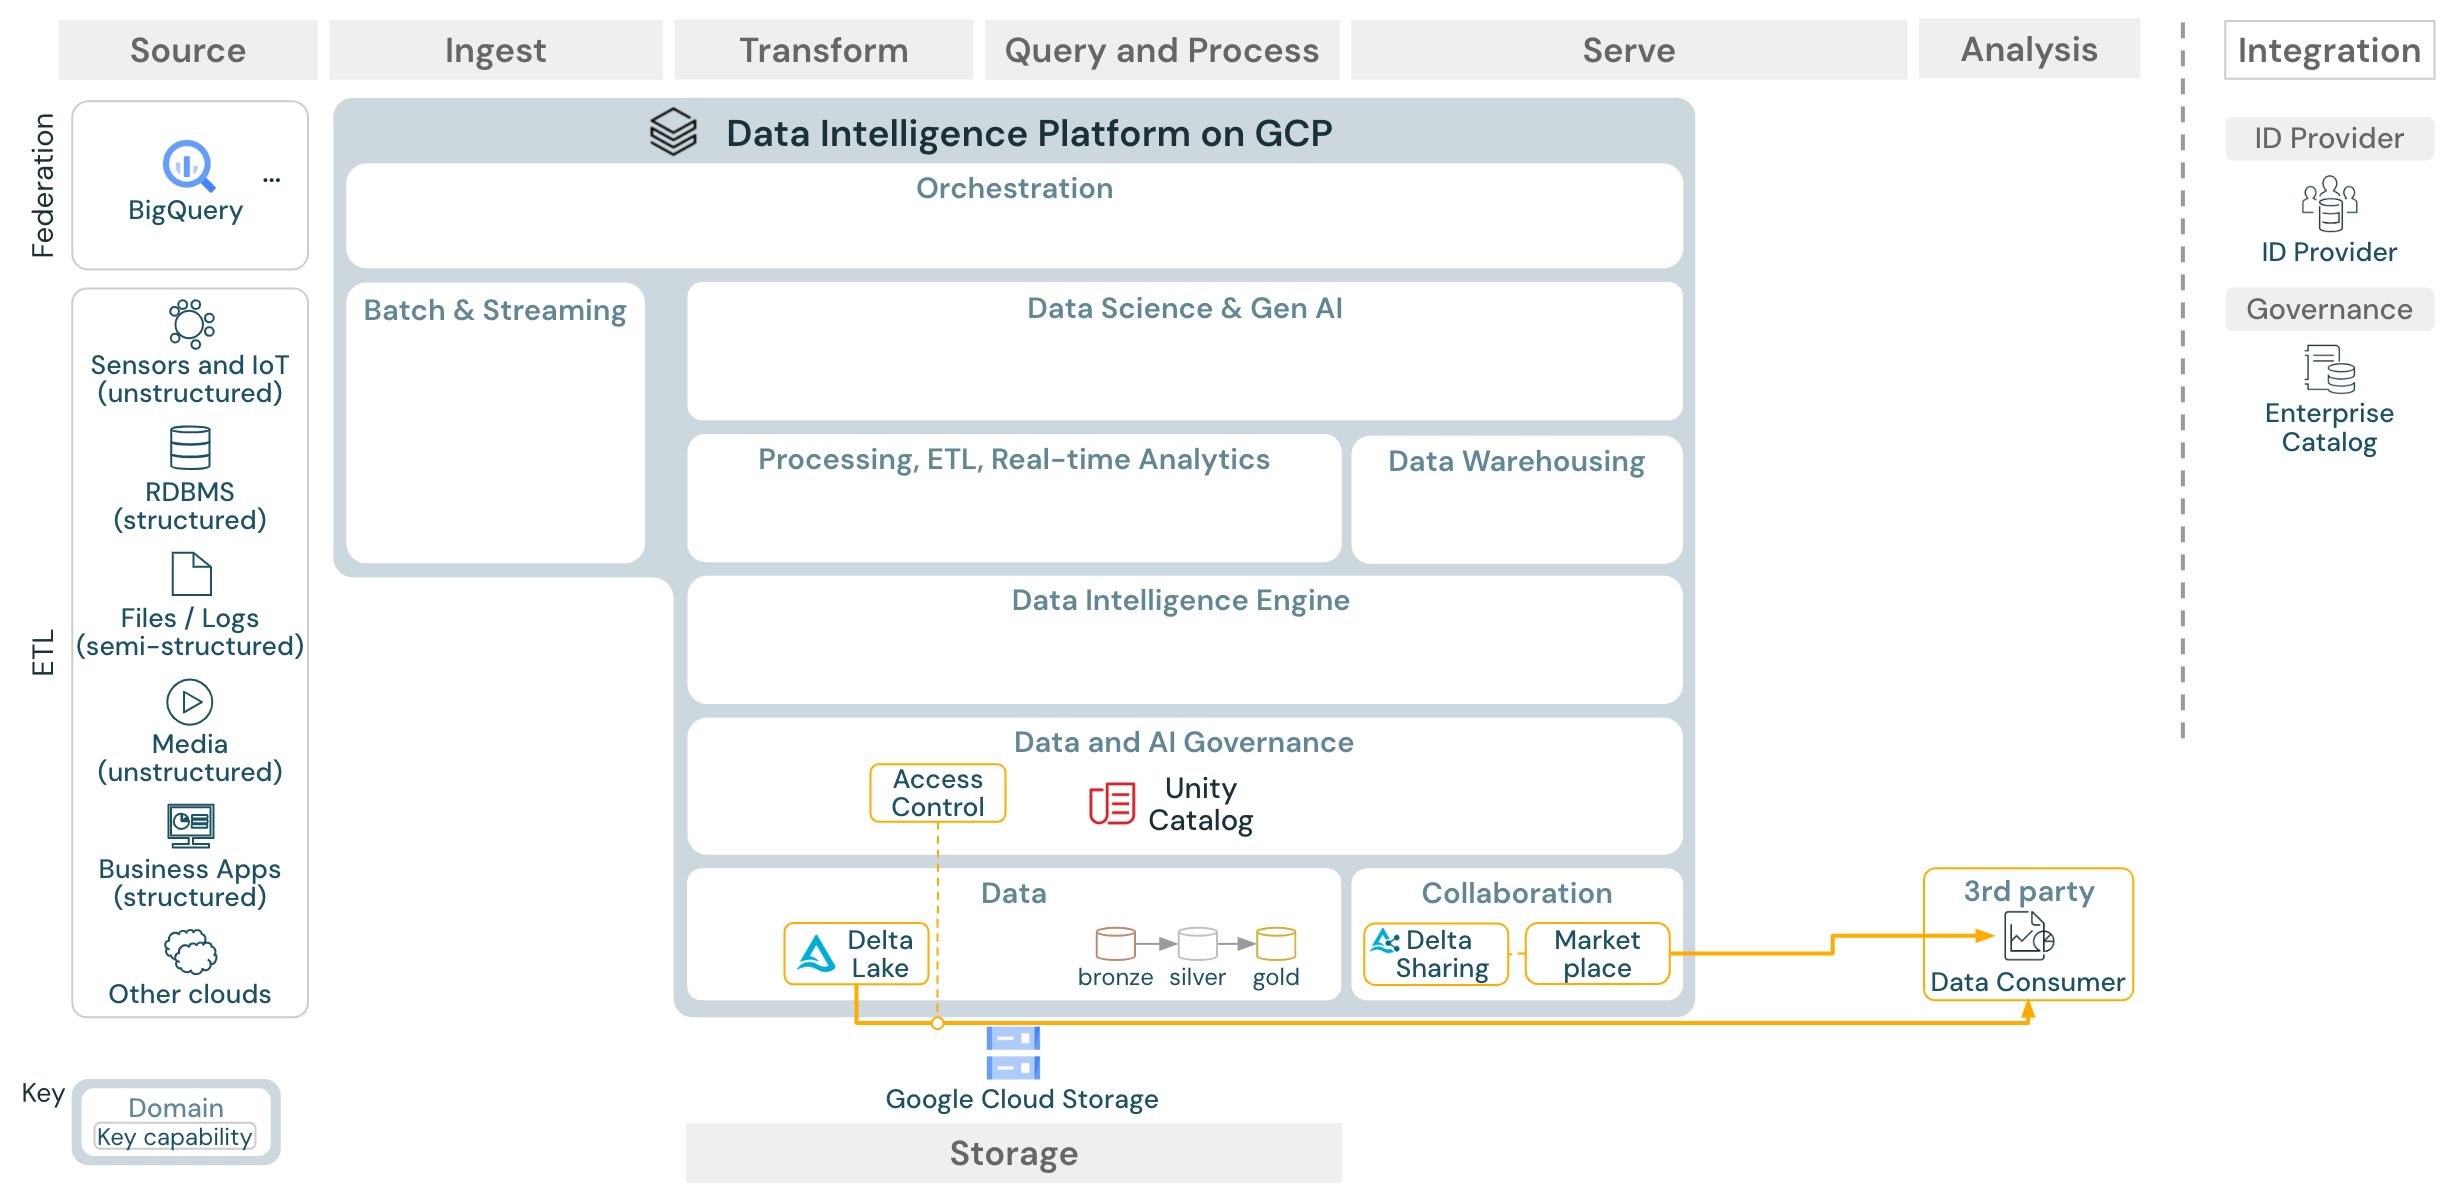 Enterprise data sharing reference architecture for Databricks on GCP